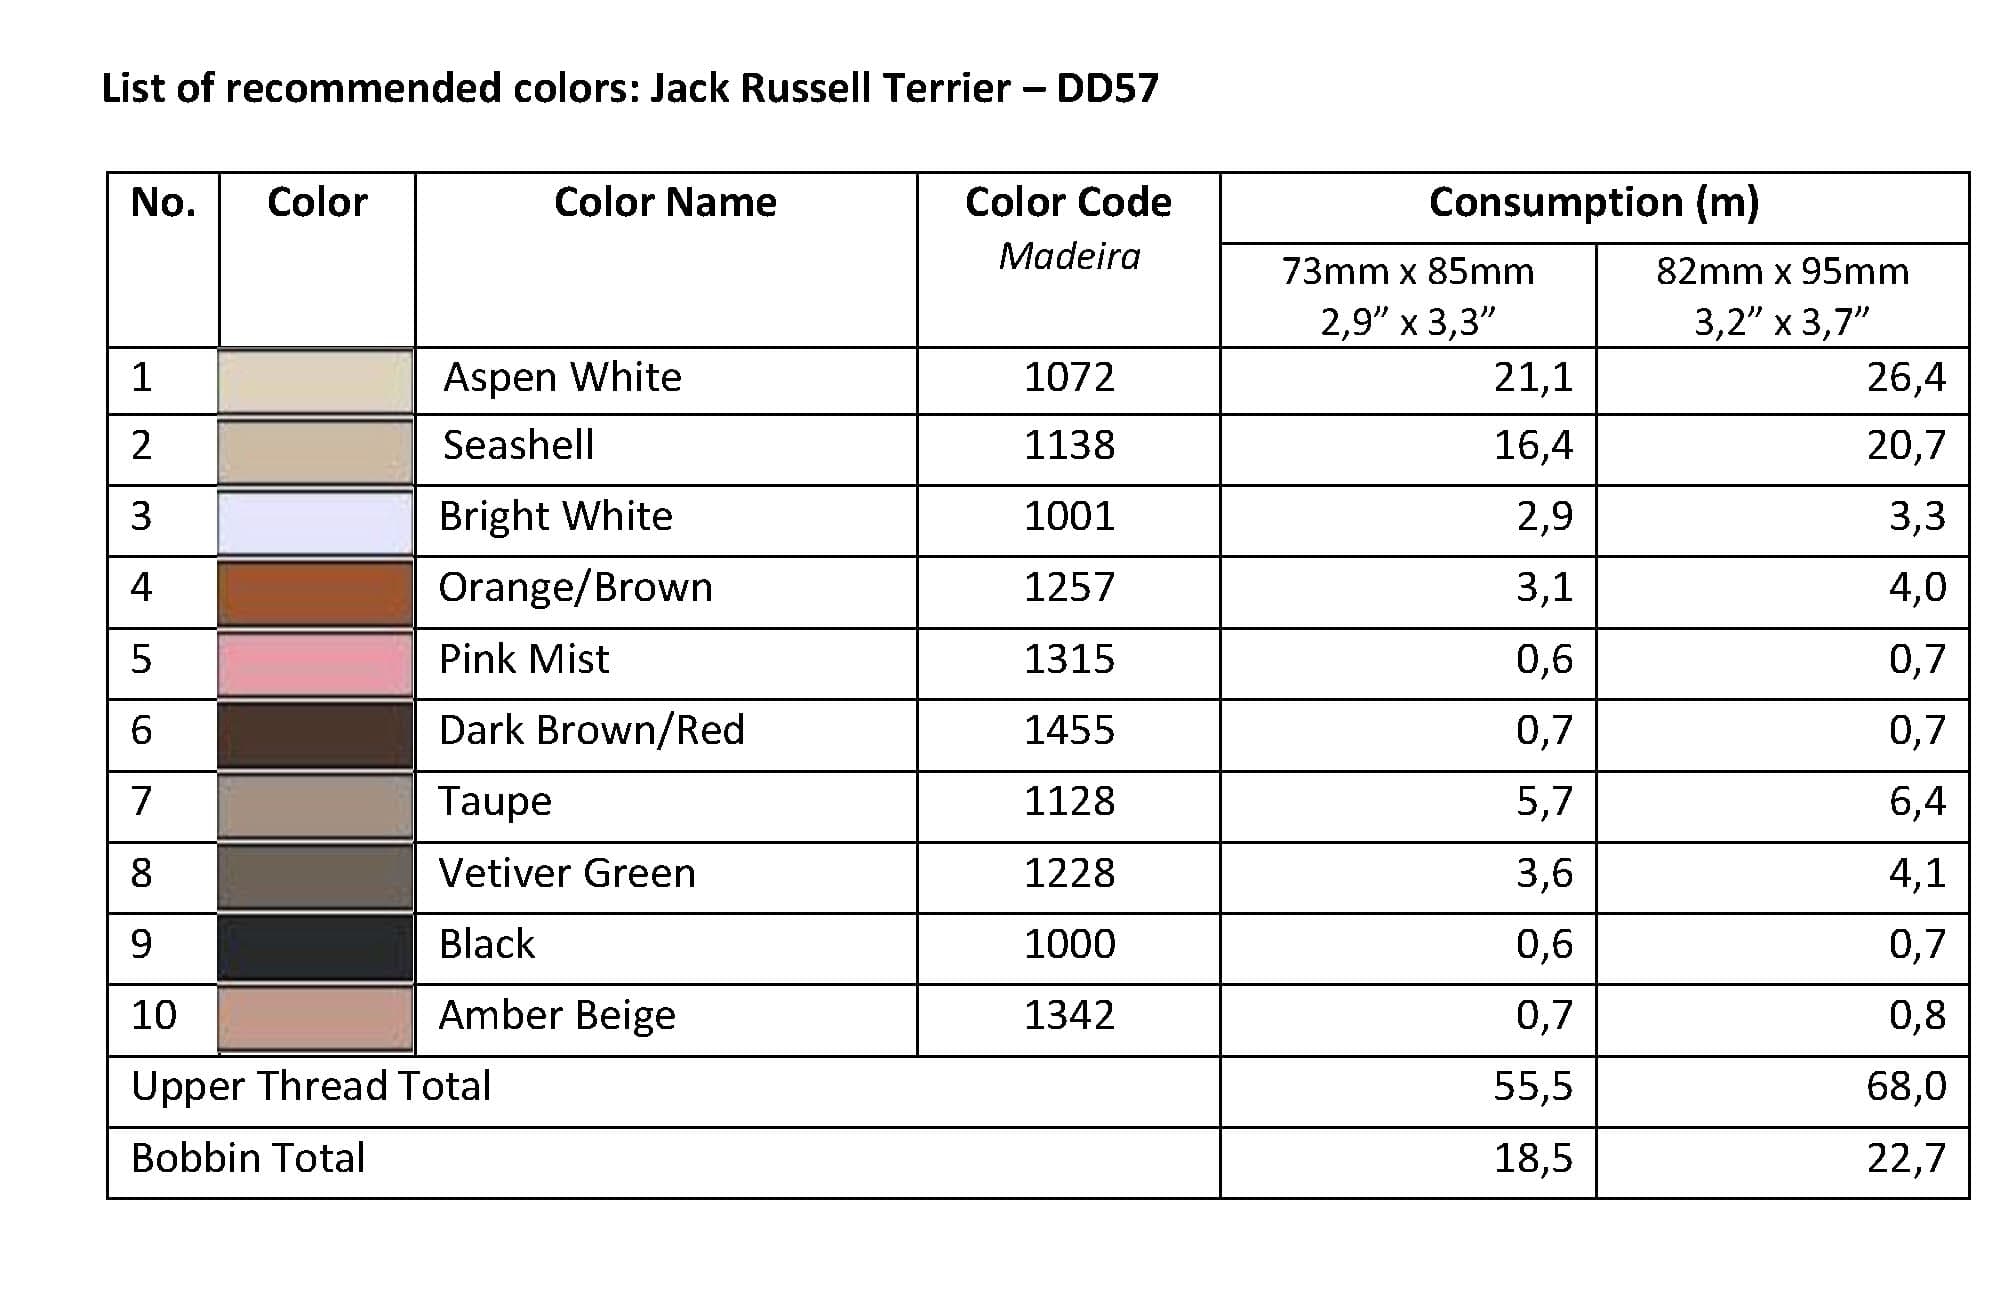 List of Recommended Colors - Jack Russel Terrier DD57